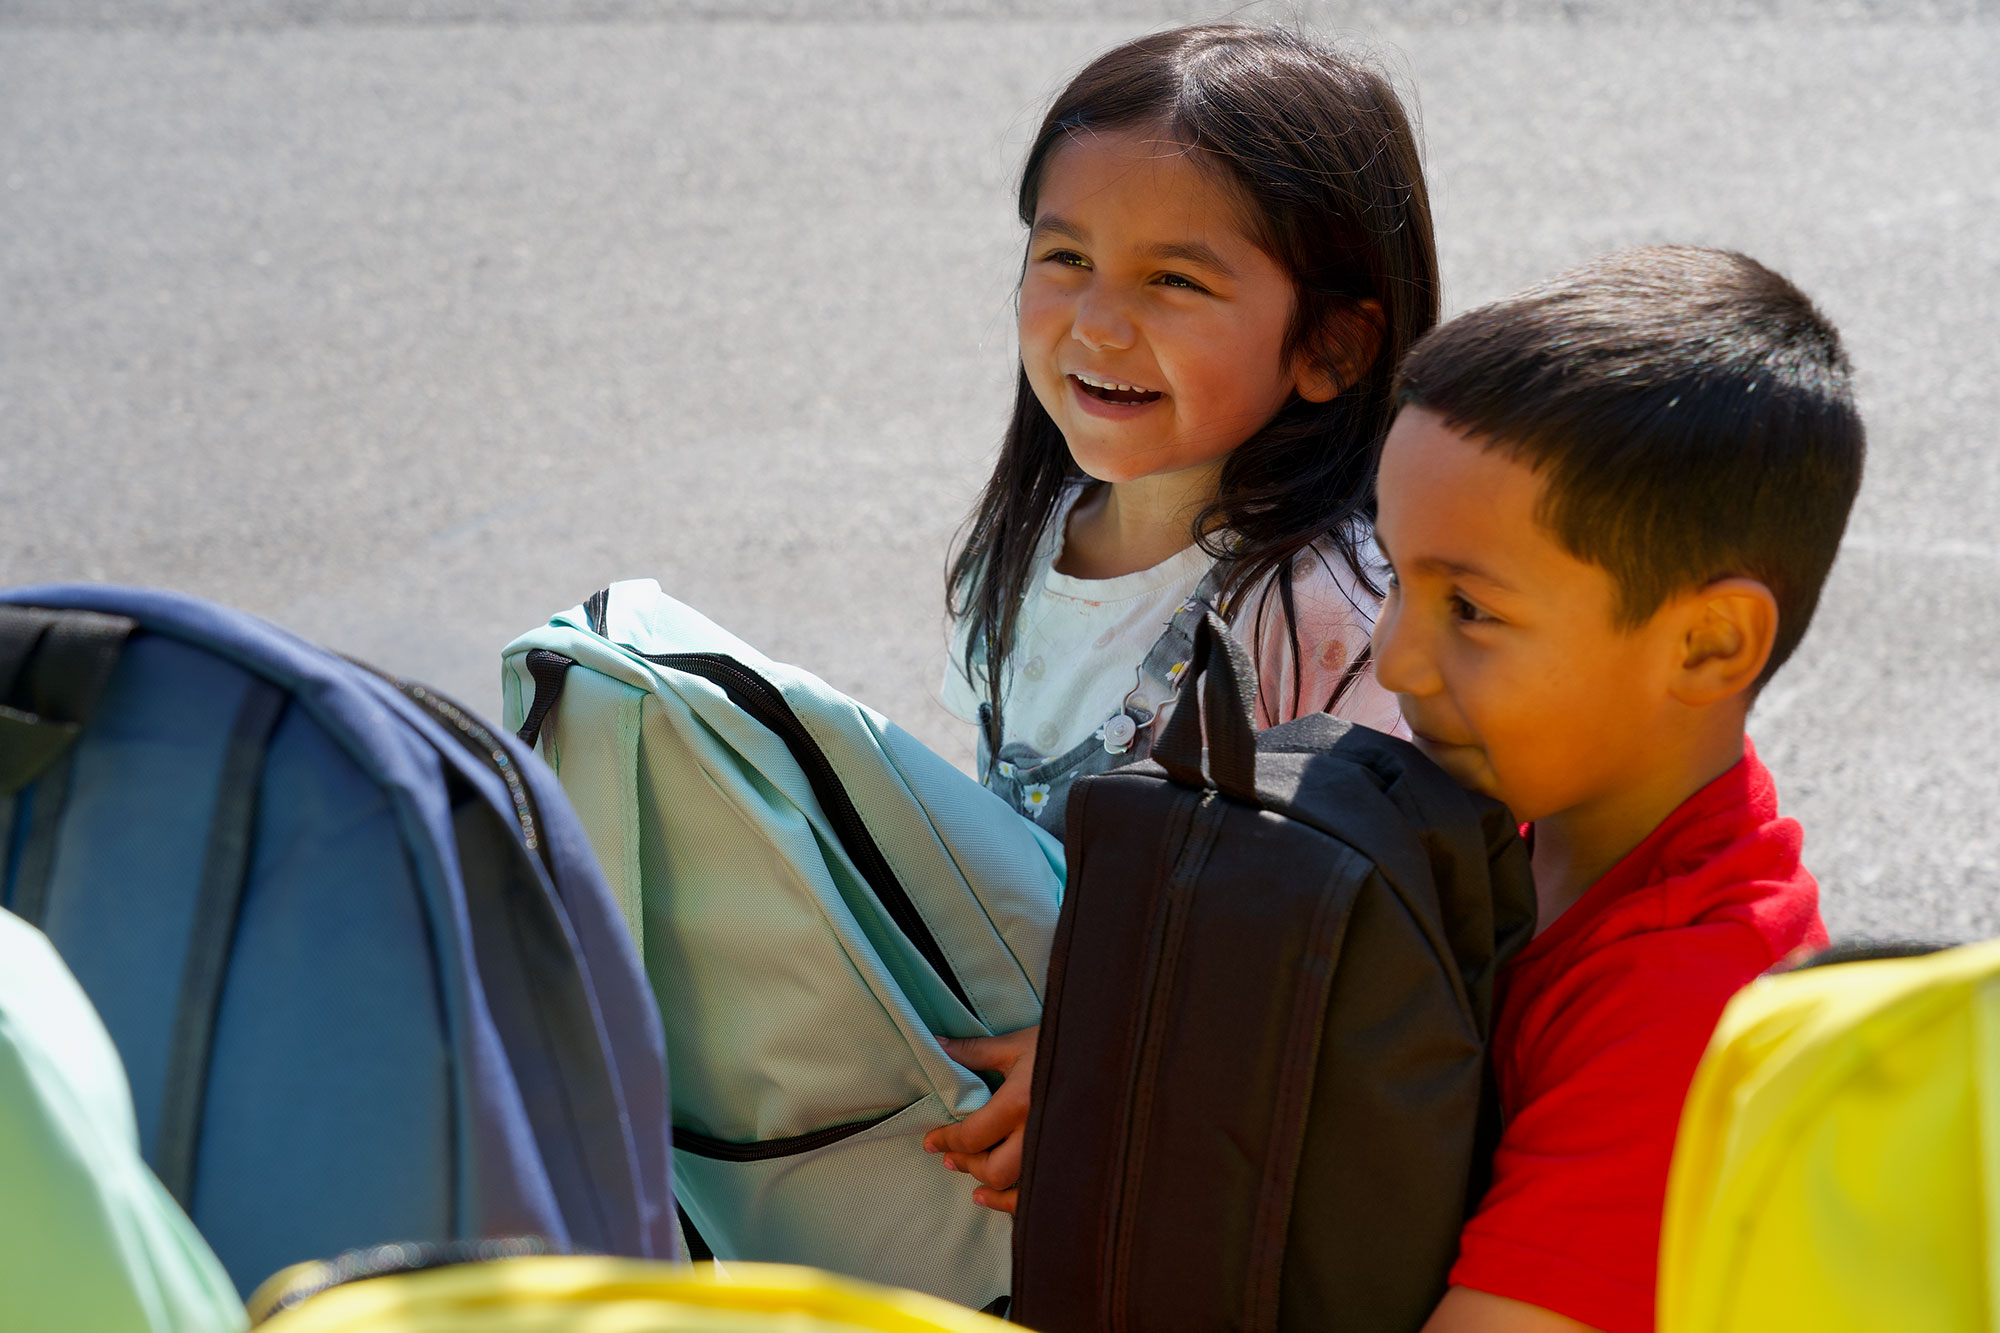 Two kids smiling with backpacks